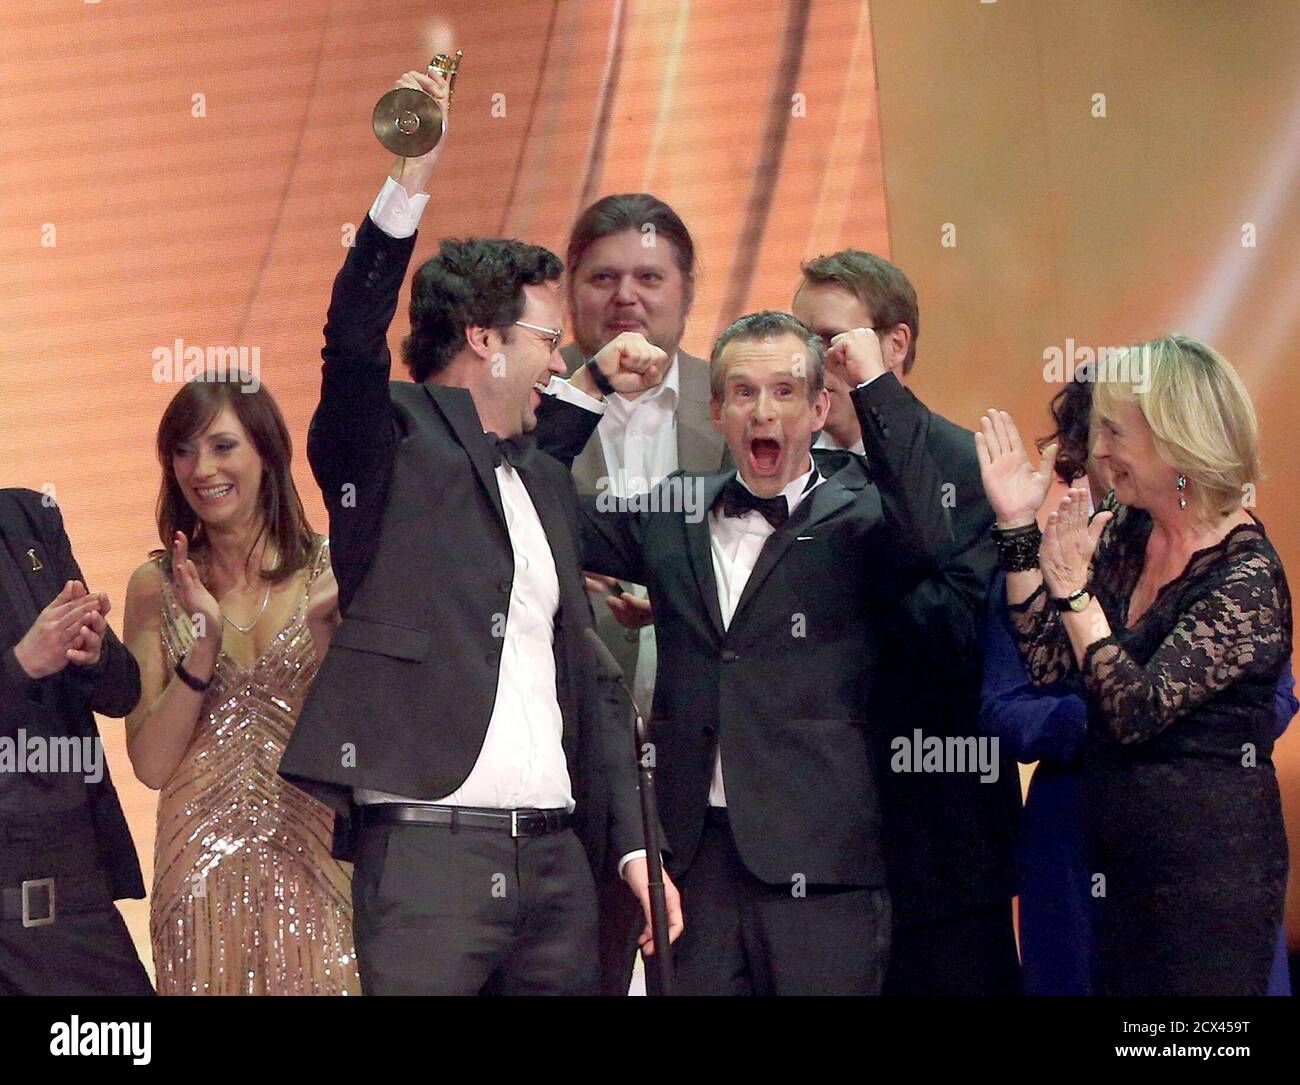 Director Florian Schwarz celebrates next to actor Ulrich Matthes (2R) and other cast members of TV series 'Tatort' as they received the award for Best TV Film for the episode 'Tatort: Im Schmerz geboren' (Tatort: Born in Pain) at the 'Die Goldene Kamera' (Golden Camera) awards ceremony in Hamburg, February 27, 2015. The Golden Cameras are awarded by a popular German TV magazine honouring excellence in the areas of television, film and entertainment.             REUTERS/Christian Charisius/Pool (GERMANY  - Tags: ENTERTAINMENT) Stock Photo